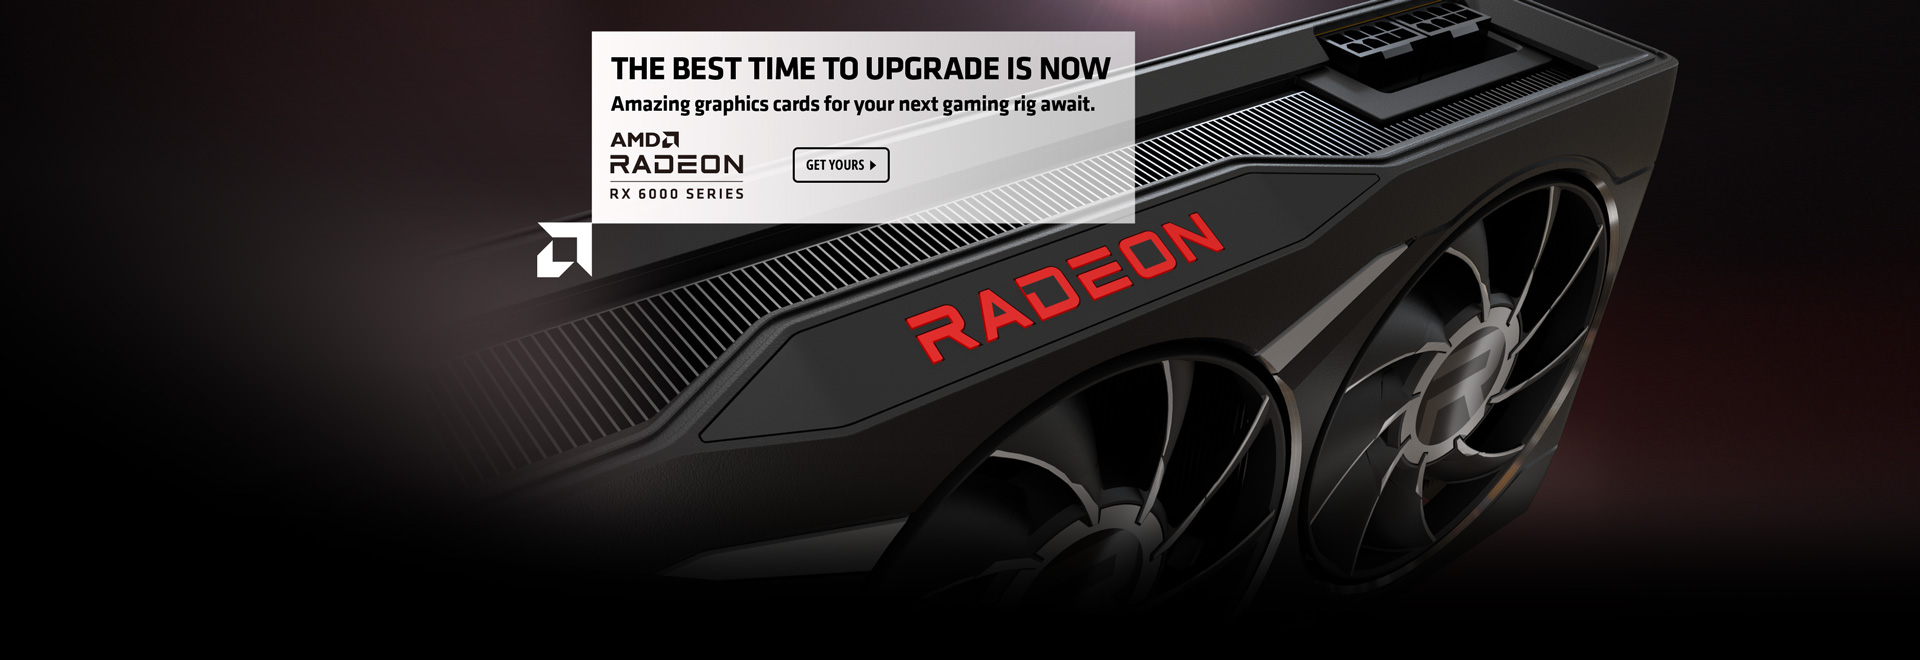 The Best Time to Upgrade is Now